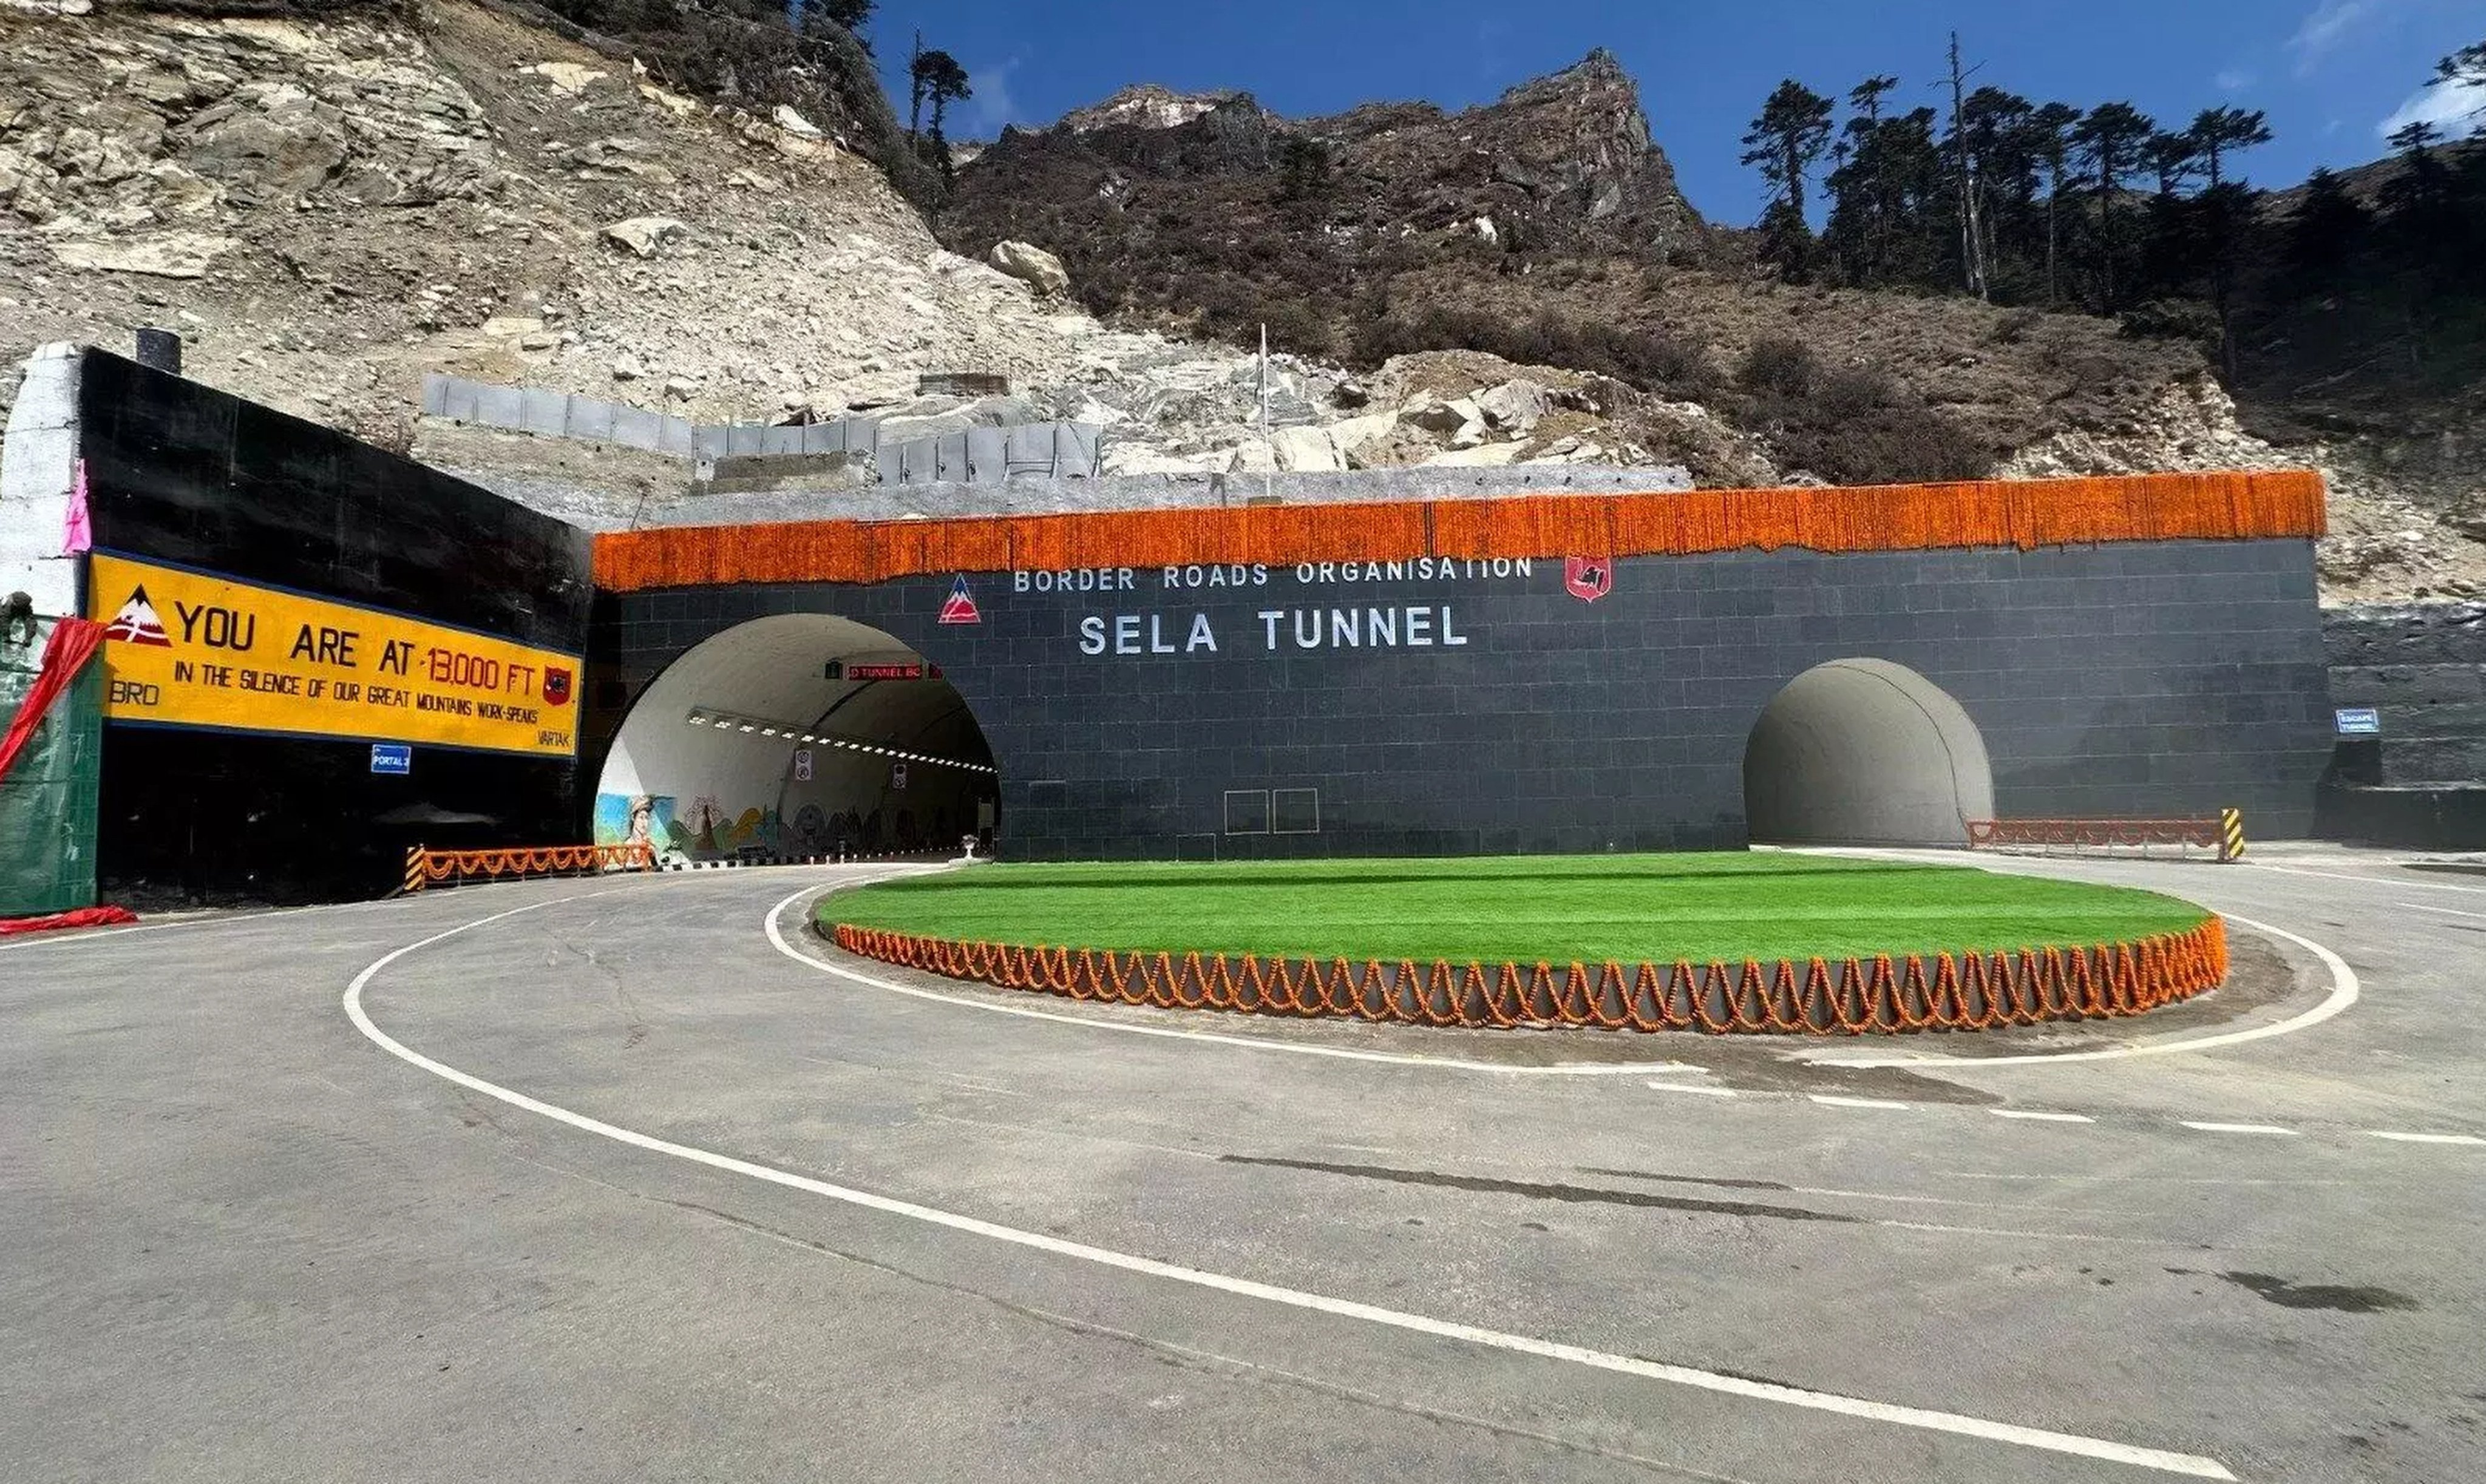 The Sela Tunnel which connects Tezpur and Tawang in Arunachal Pradesh was constructed at an altitude of 13,000 feet (39,600 metres). Photo: X/ @gemsofbabus_